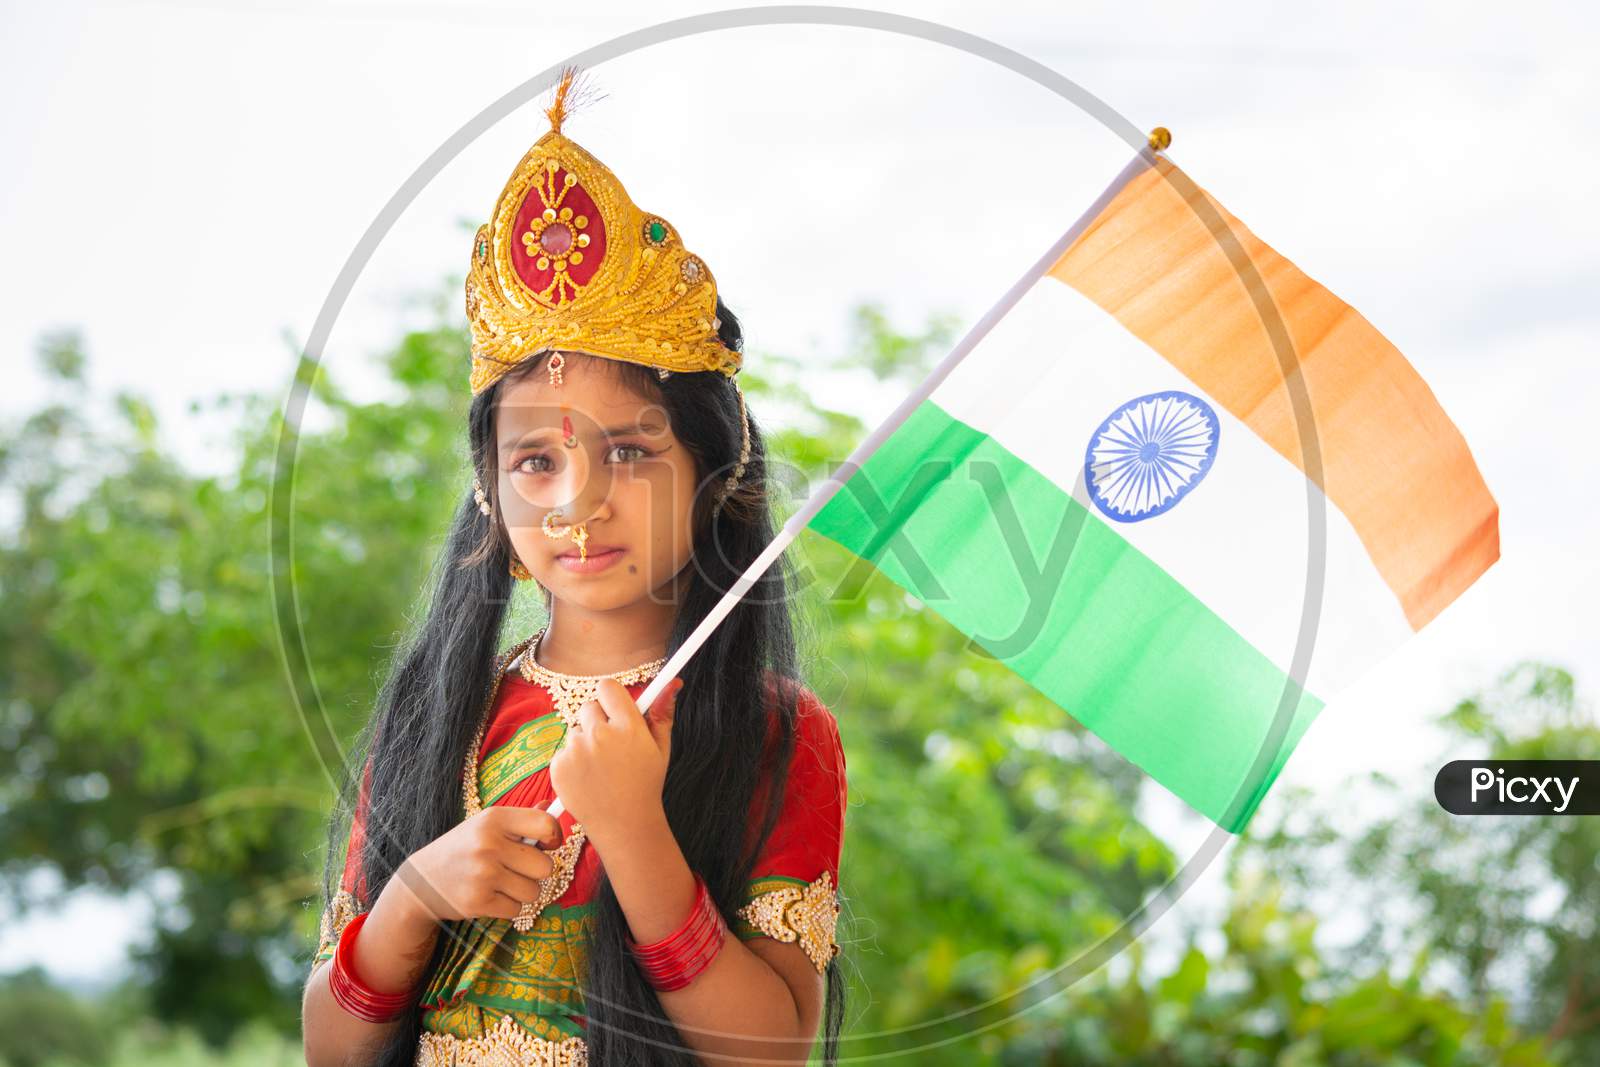 Small Cute Little Indian Girl Kid In Bharat Mata Or Mother India Attire With Indian Flag In Hand.